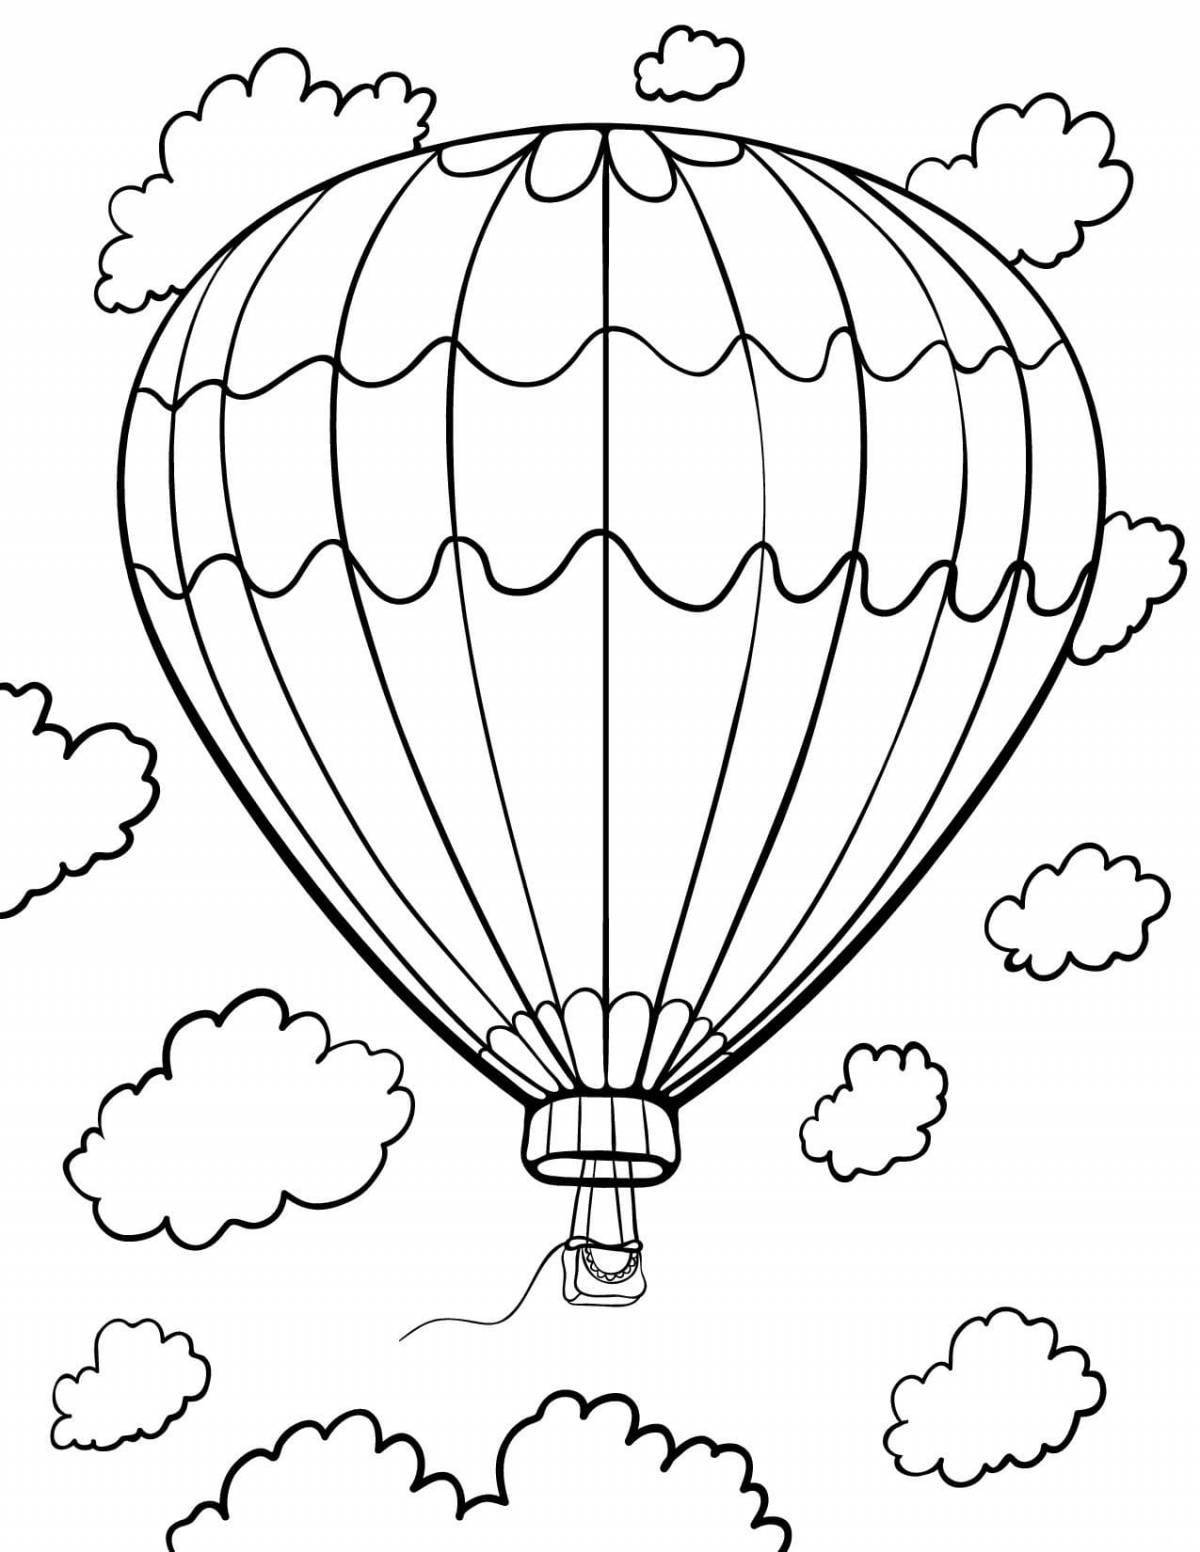 Charming balloon with basket coloring